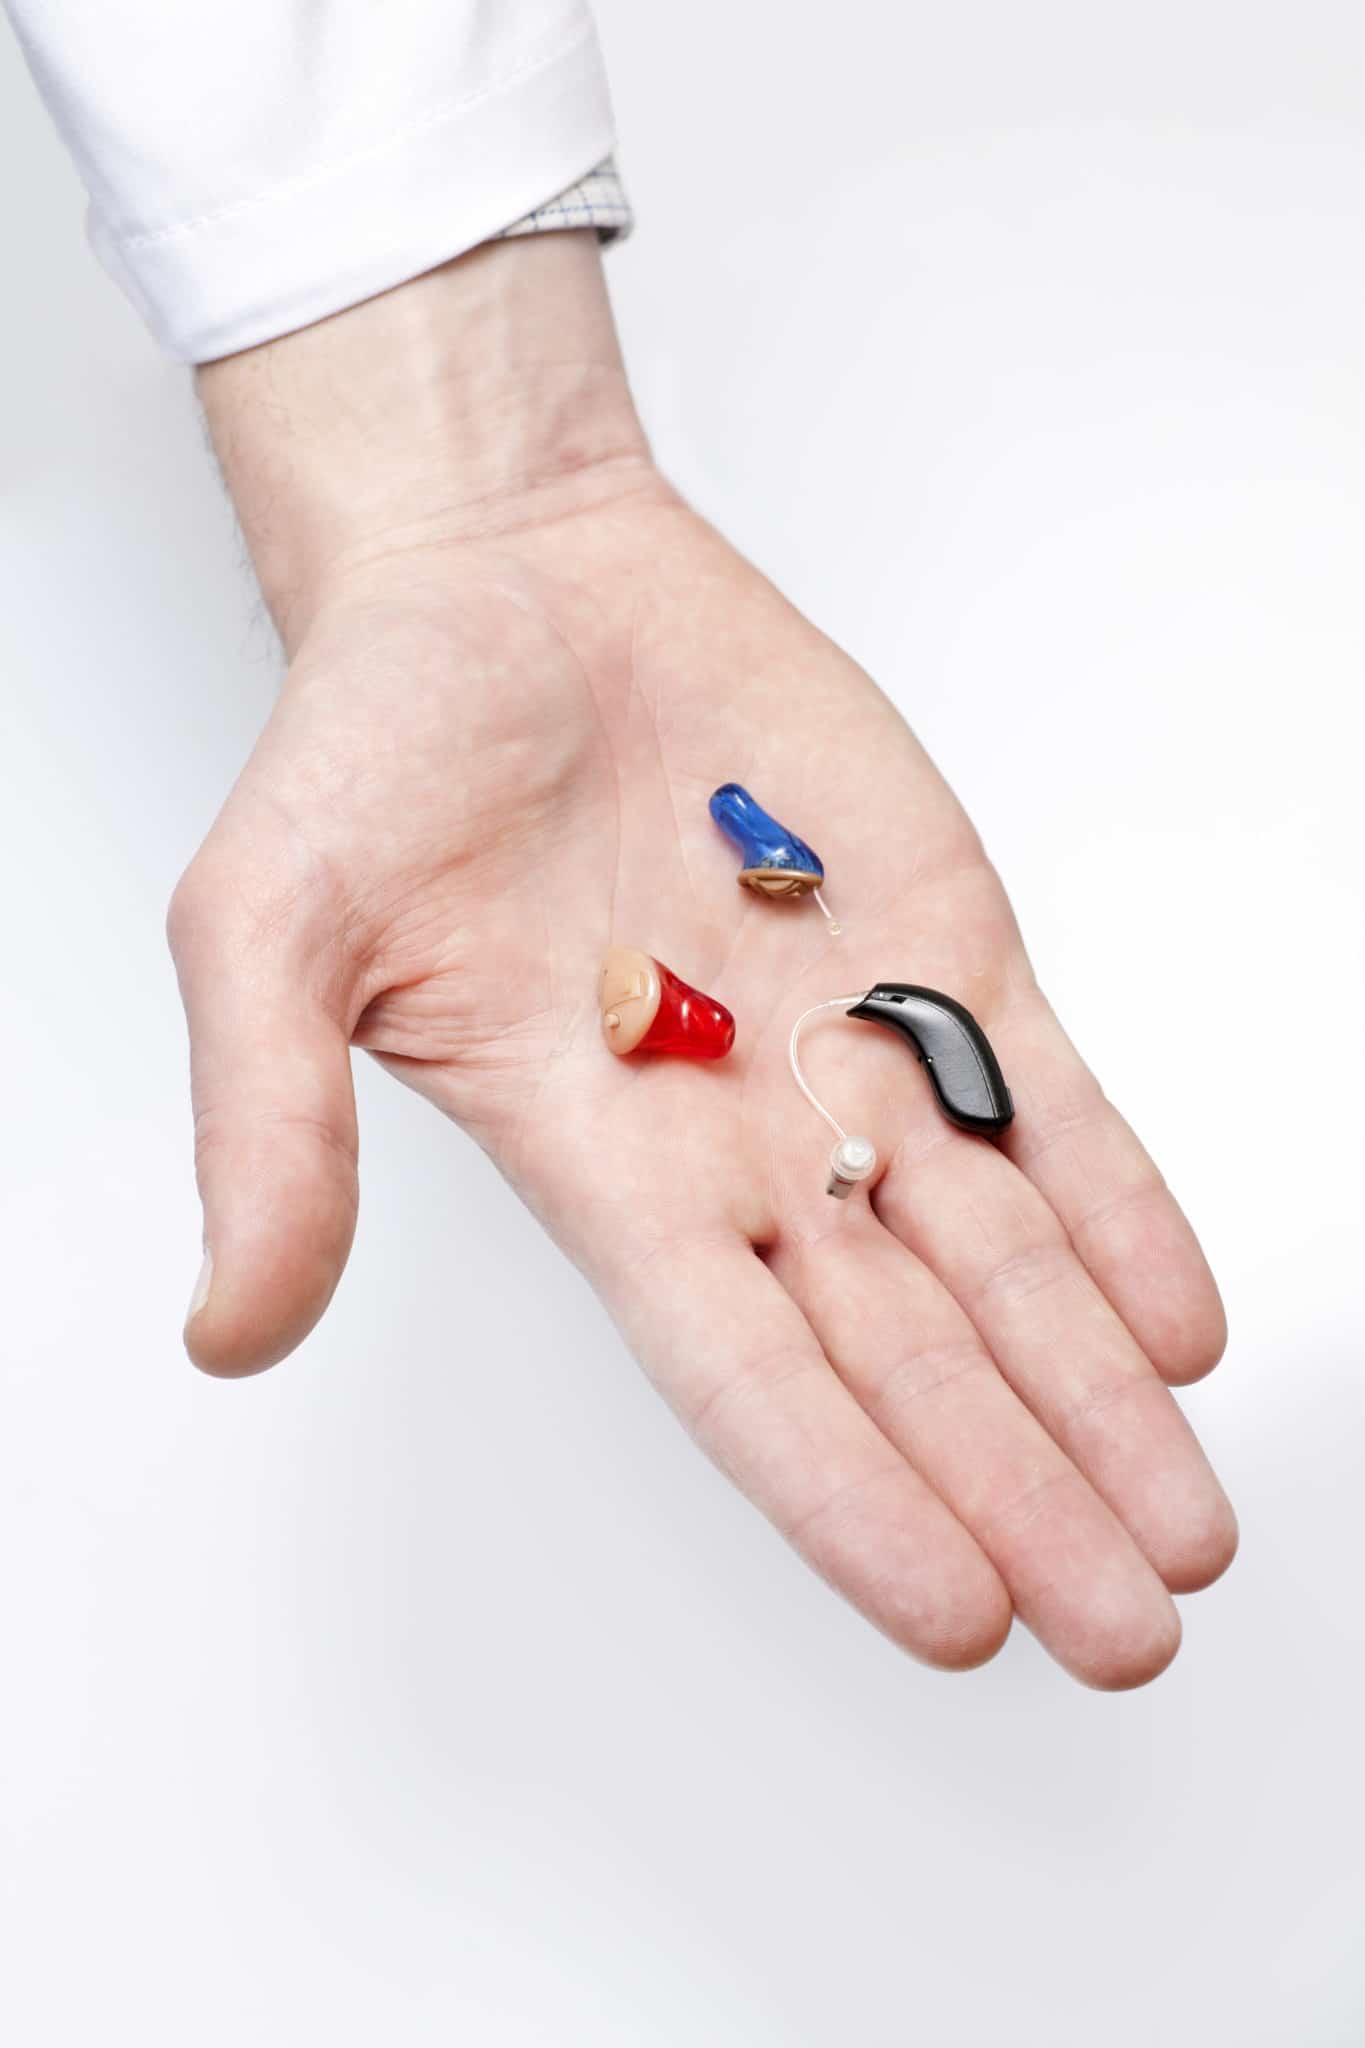 Hand holding variety of hearing aids in Cincinatti, Ohio office.